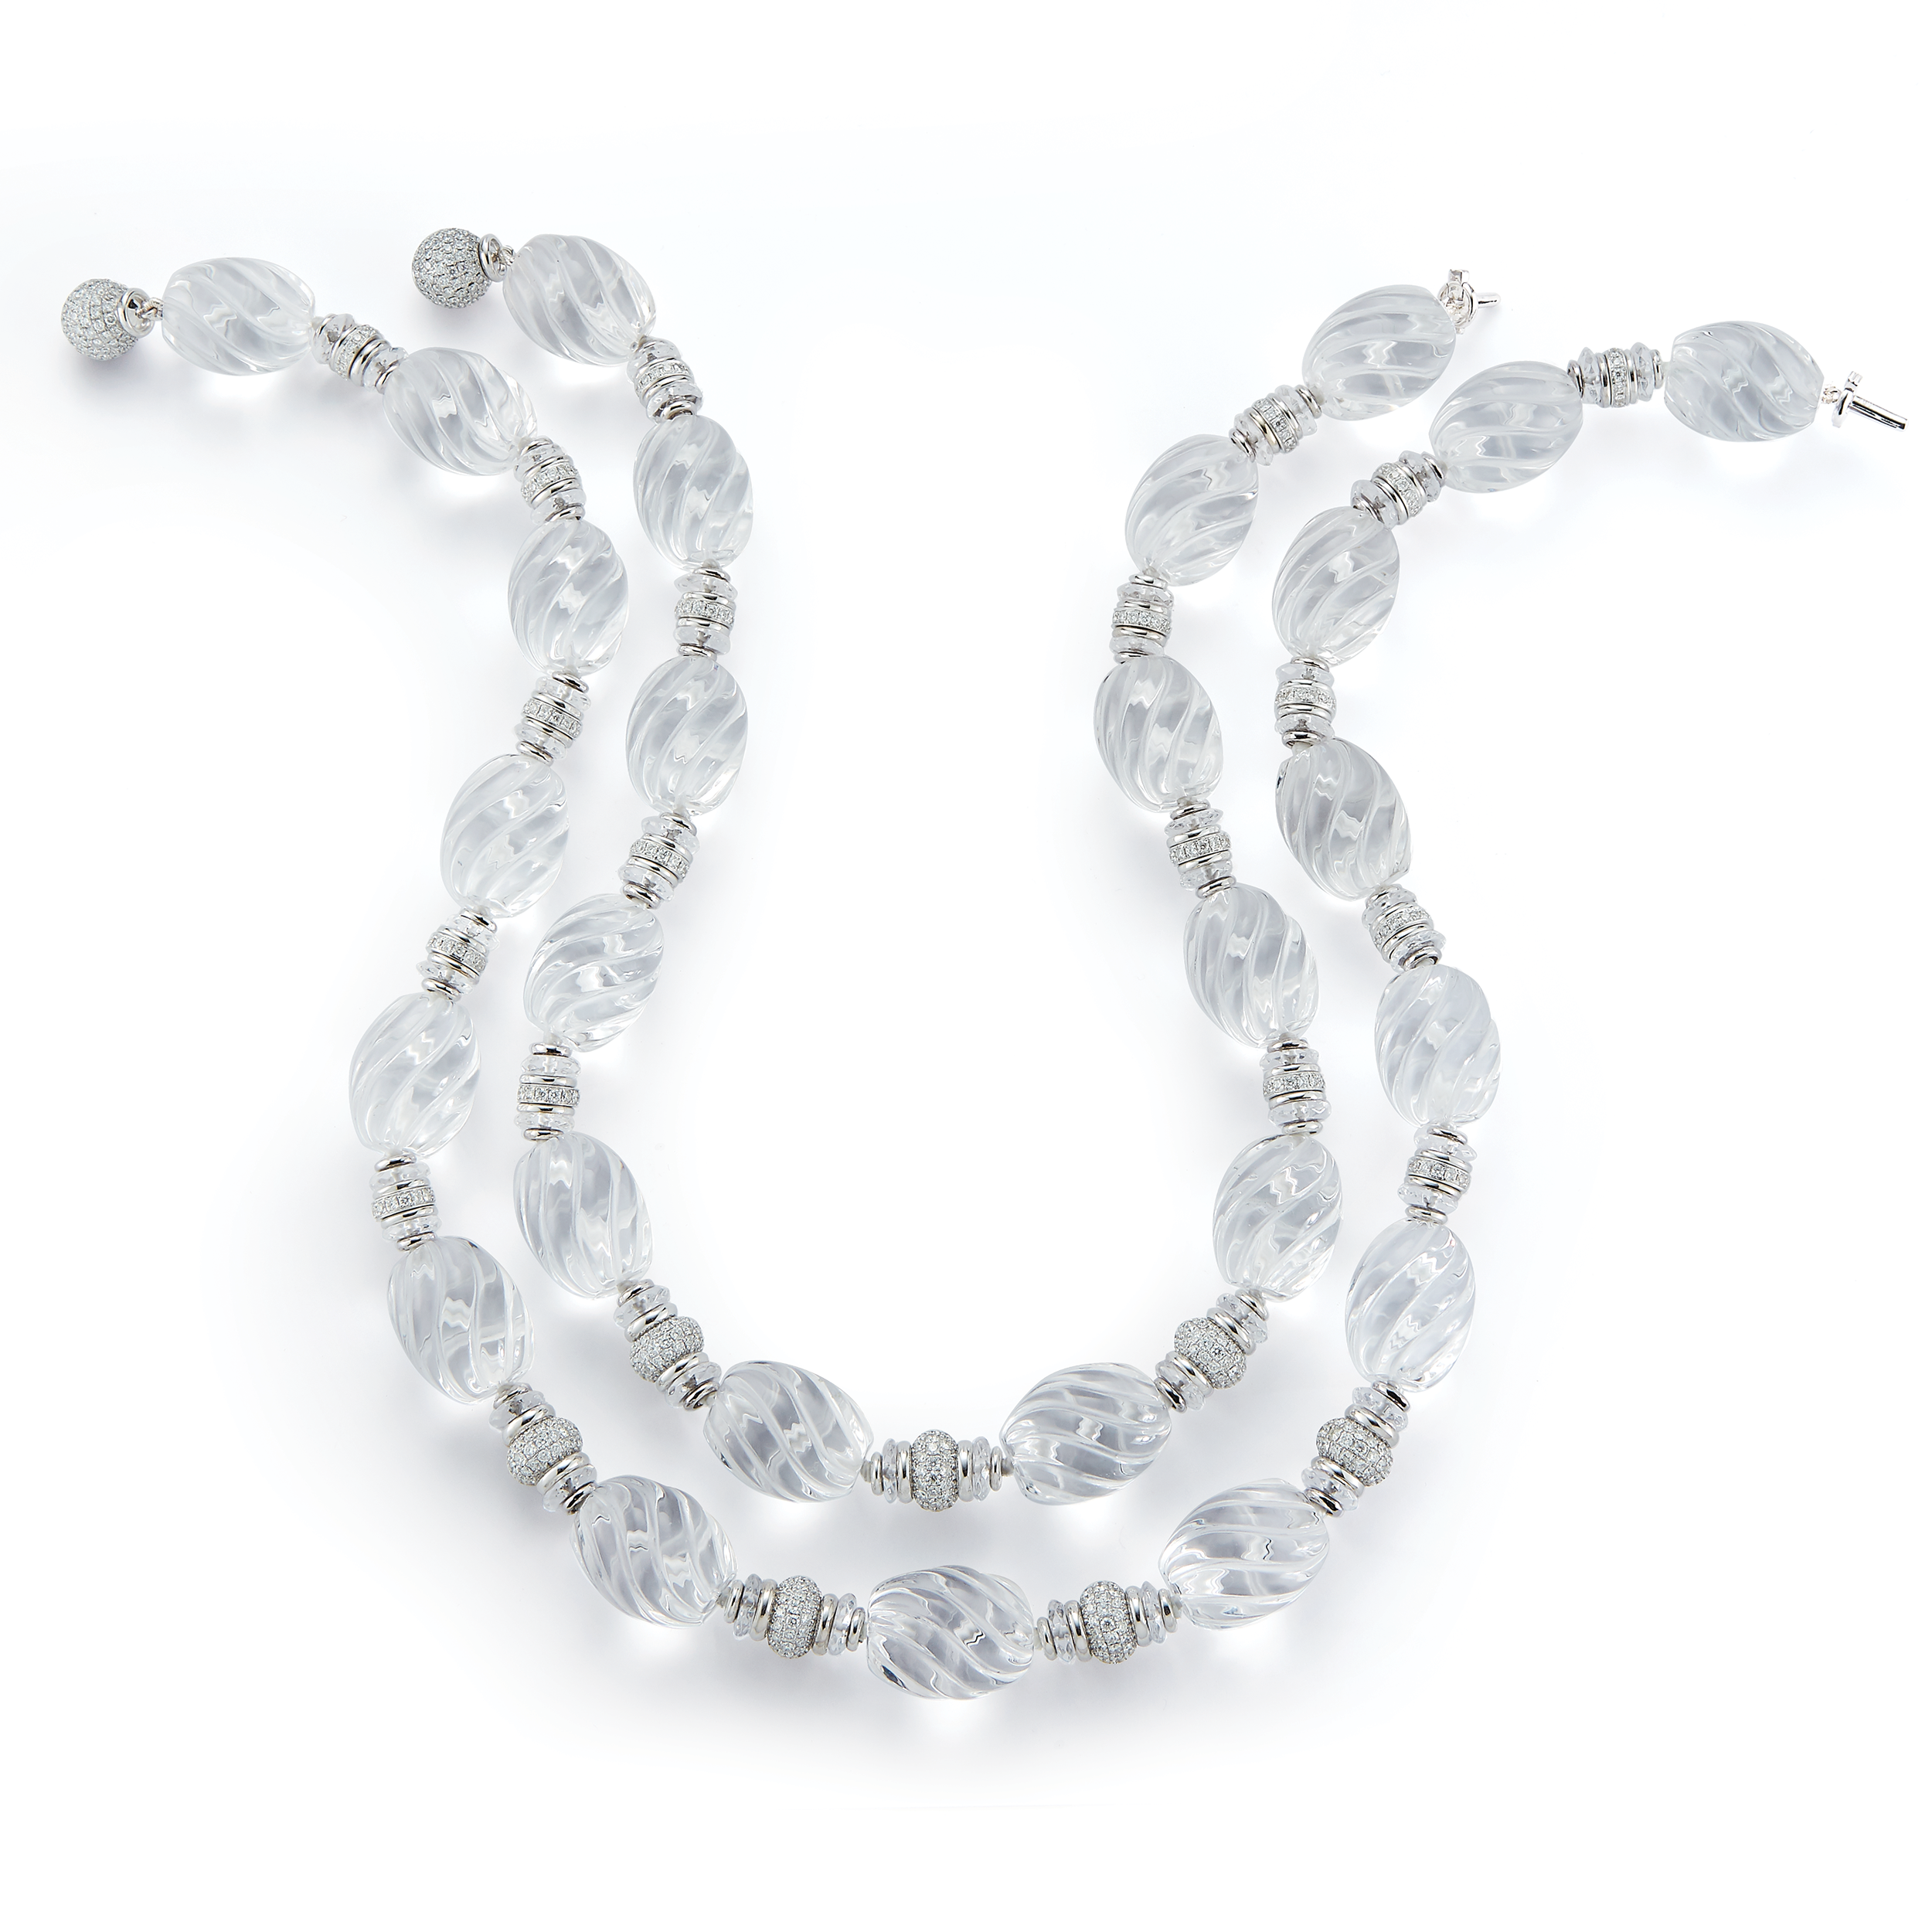 Torchon Necklaces in Carved Crystal & Pave Diamond